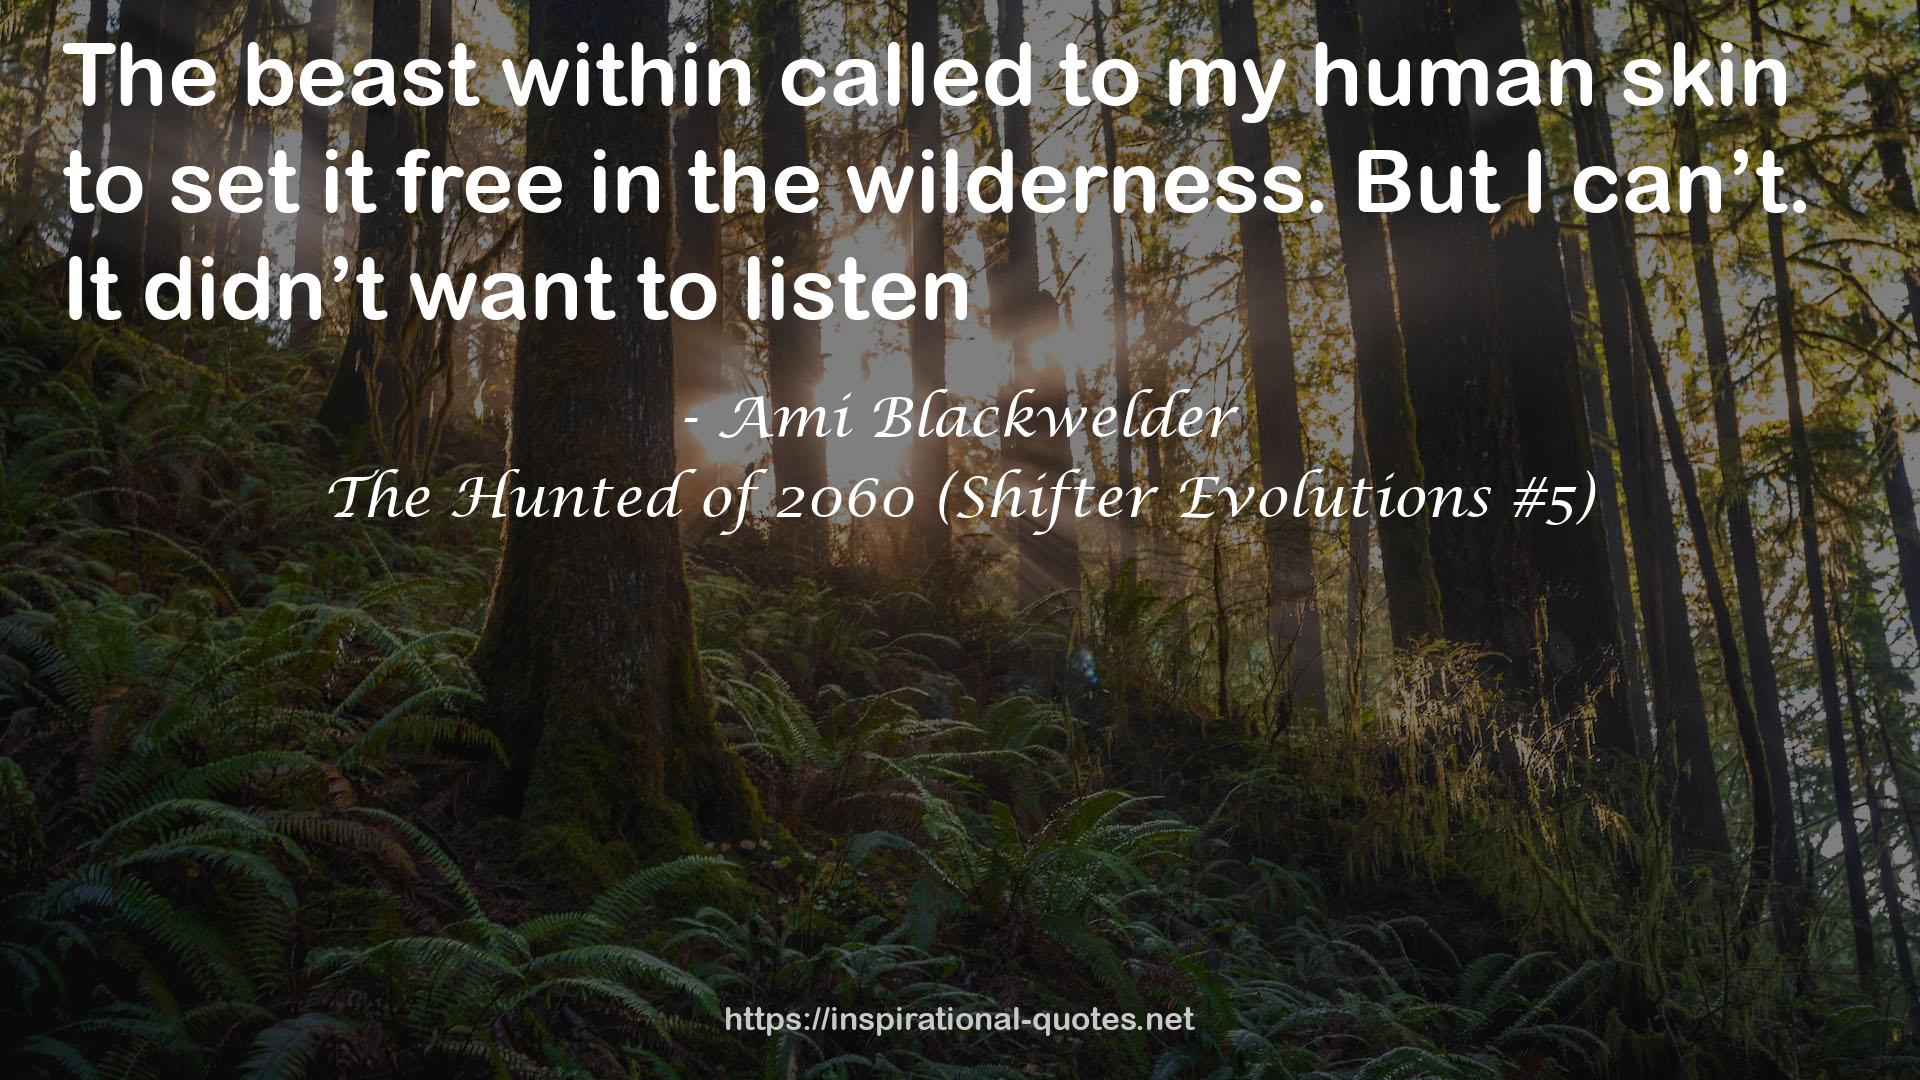 The Hunted of 2060 (Shifter Evolutions #5) QUOTES